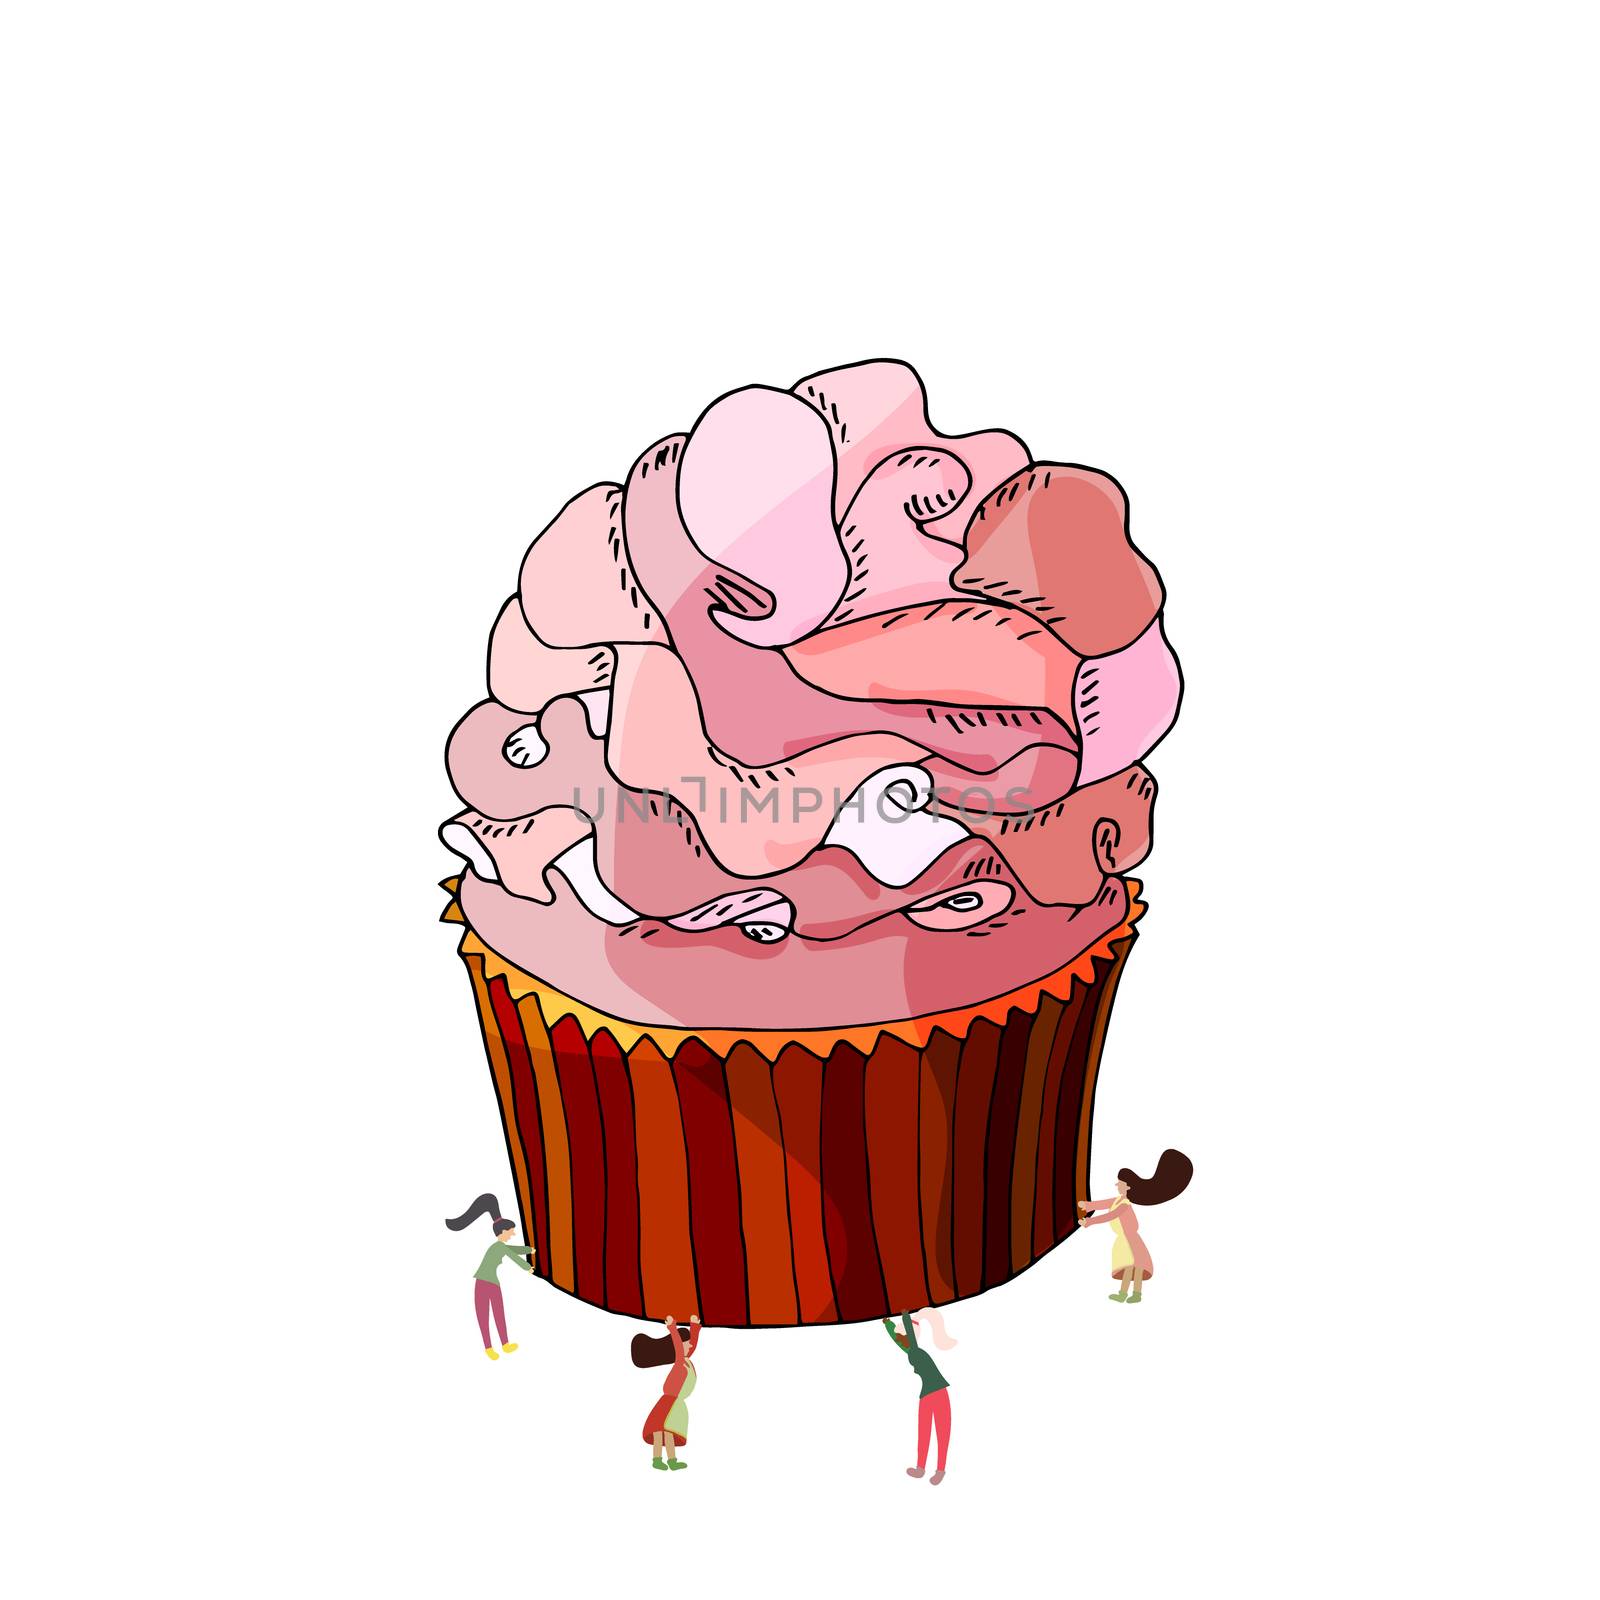 Small women holding a giant cupcake. Cute vector illustration. 